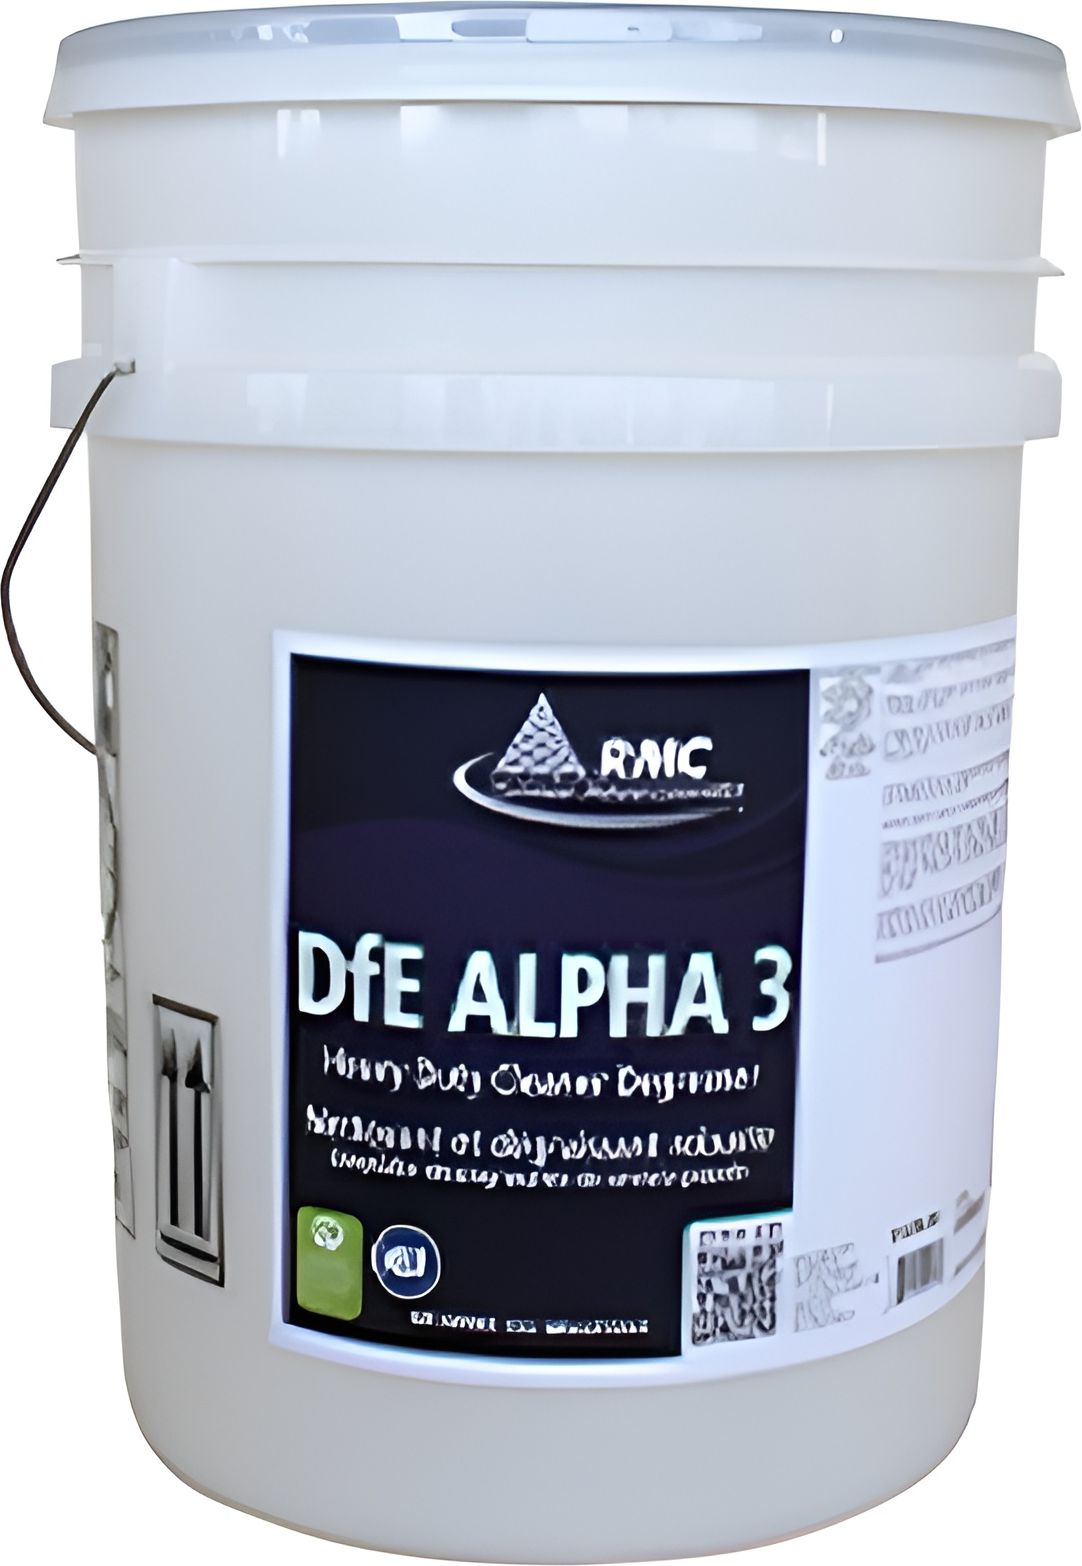 Rochester Midland - DfE Alpha 3 Heavy Duty General Purpose Concentrated Cleaner 20L Pail - 11771948